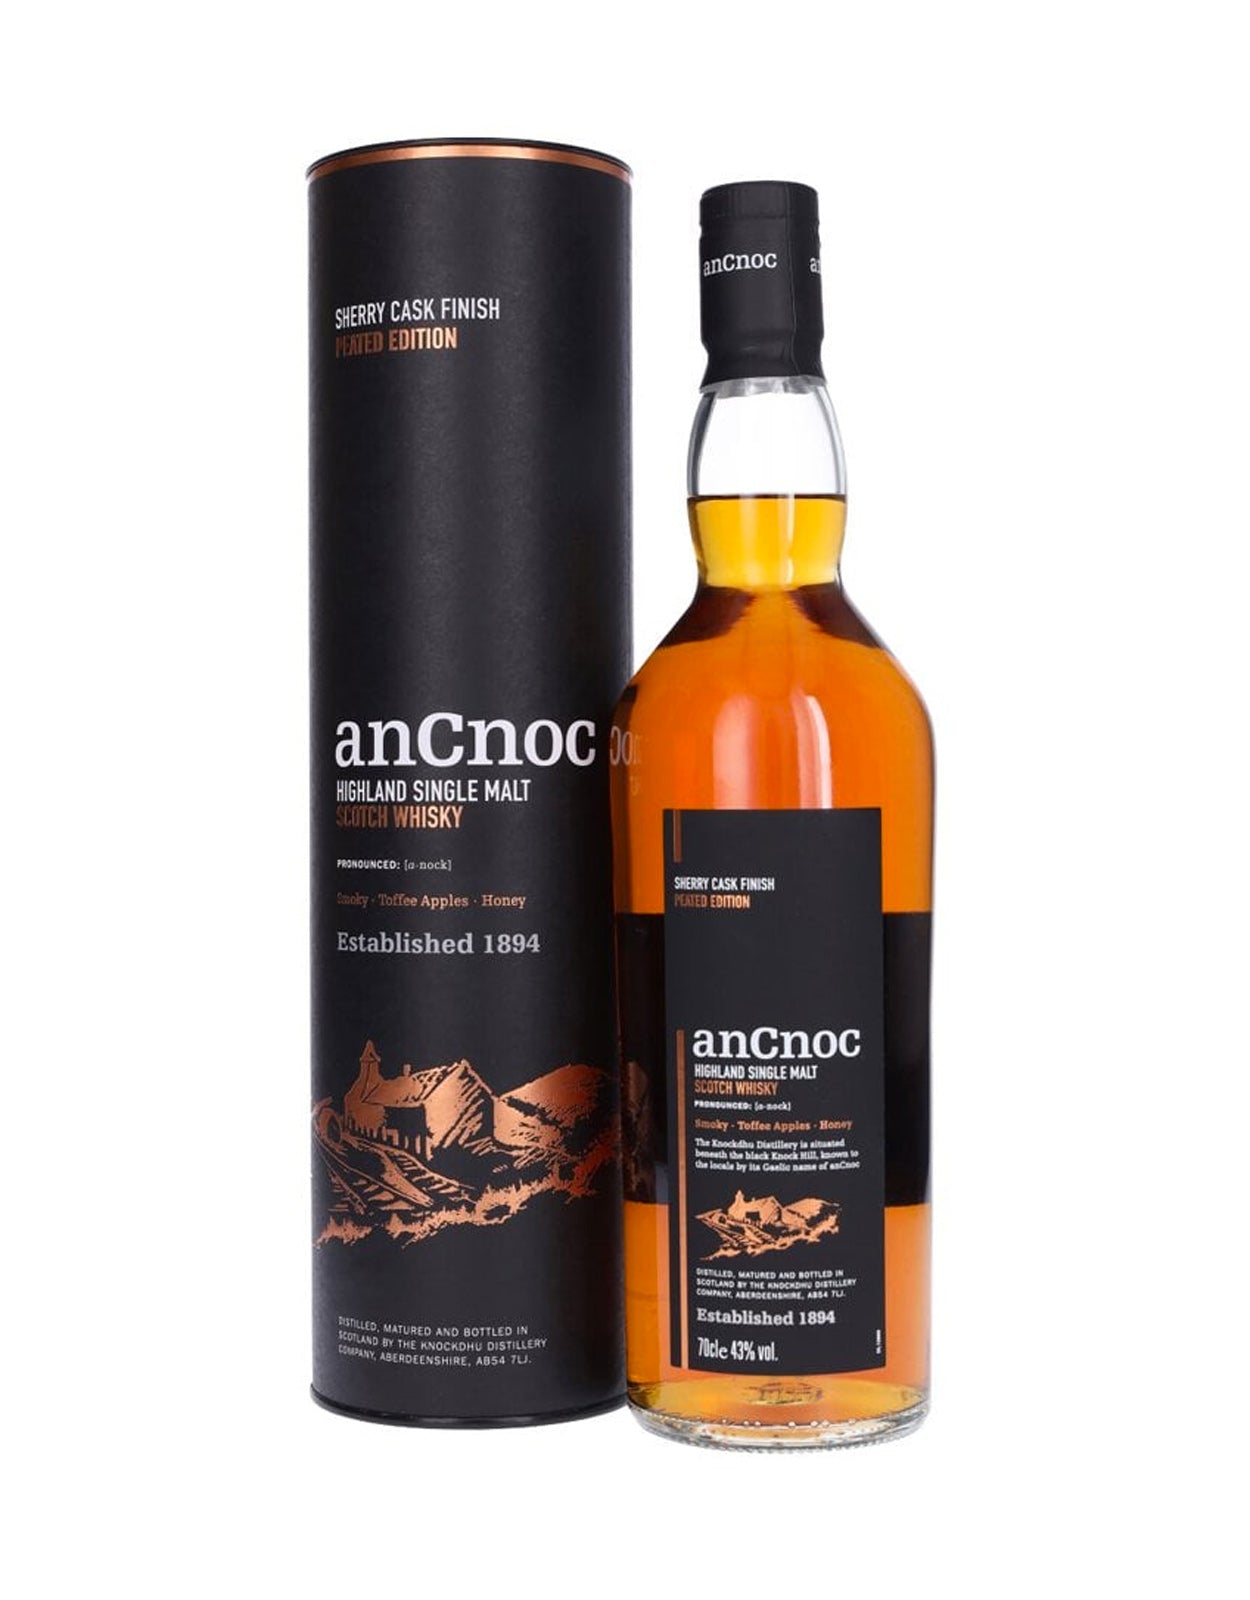 Ancnoc Sherry Cask Finish Peated Edition